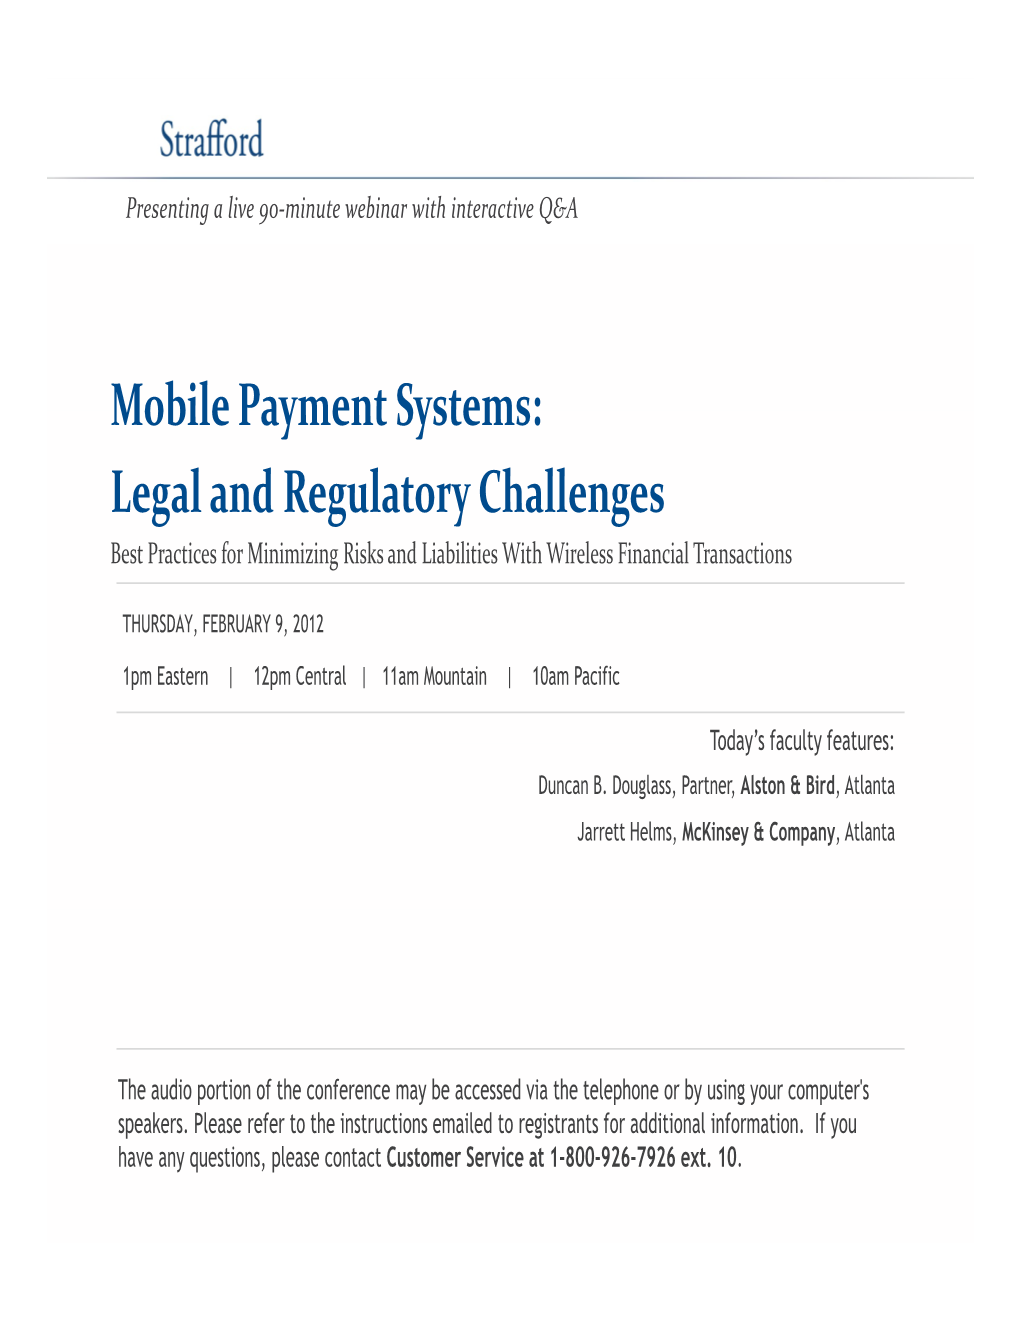 Mobile Payment Systems: Legal and Regulatory Challenges Best Practices for Minimizing Risks and Liabilities with Wireless Financial Transactions